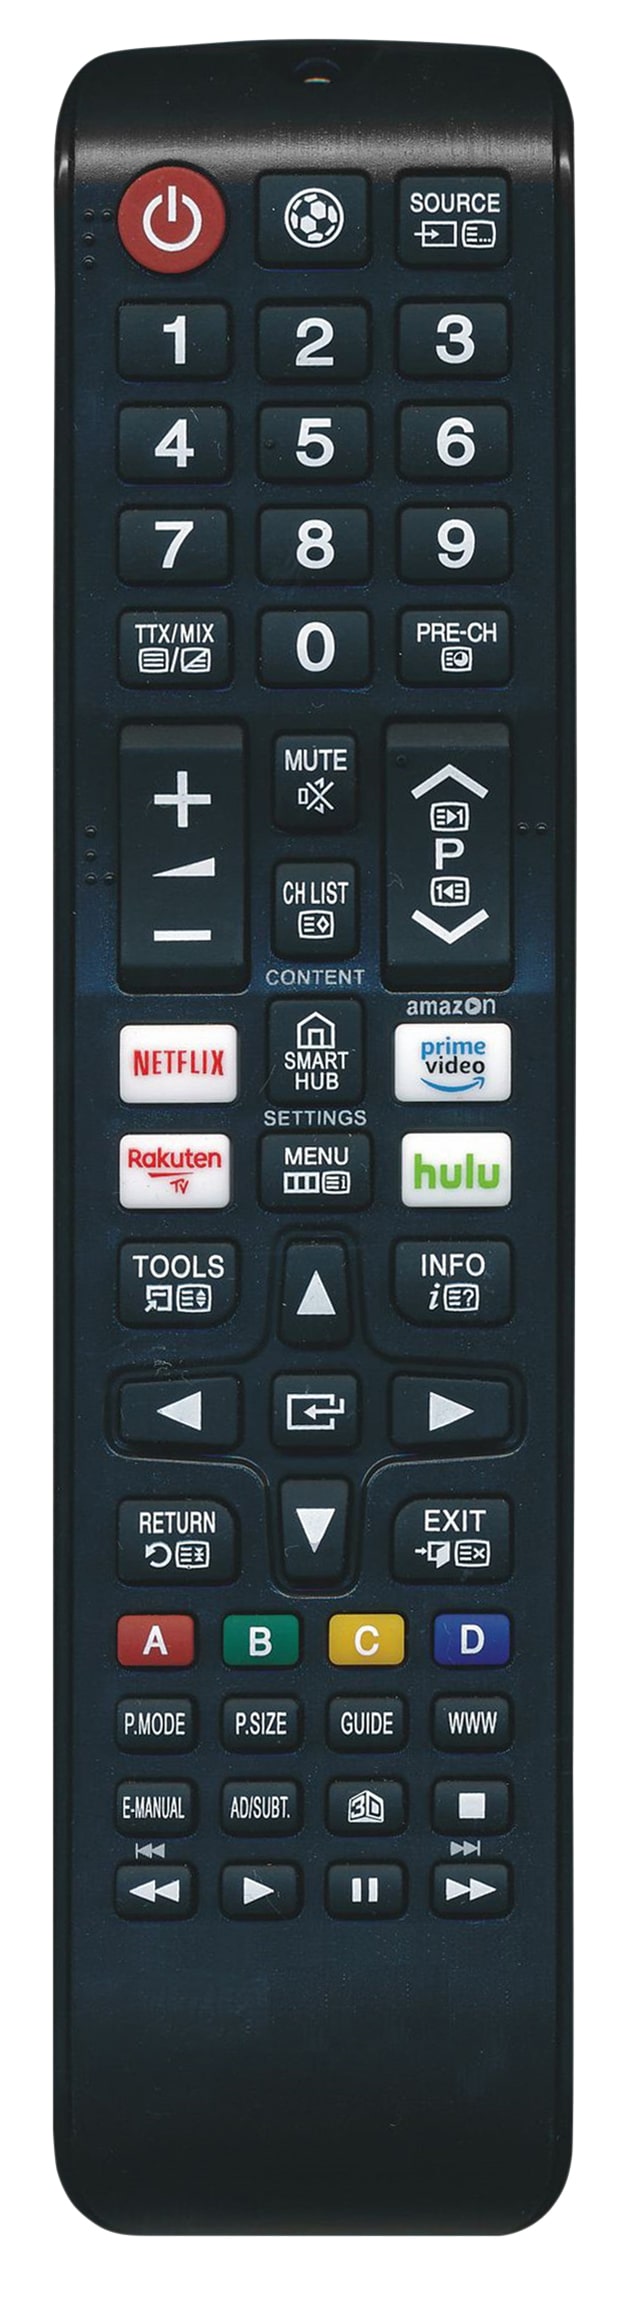 JL1716 Replacement remote control for Samsung televisions